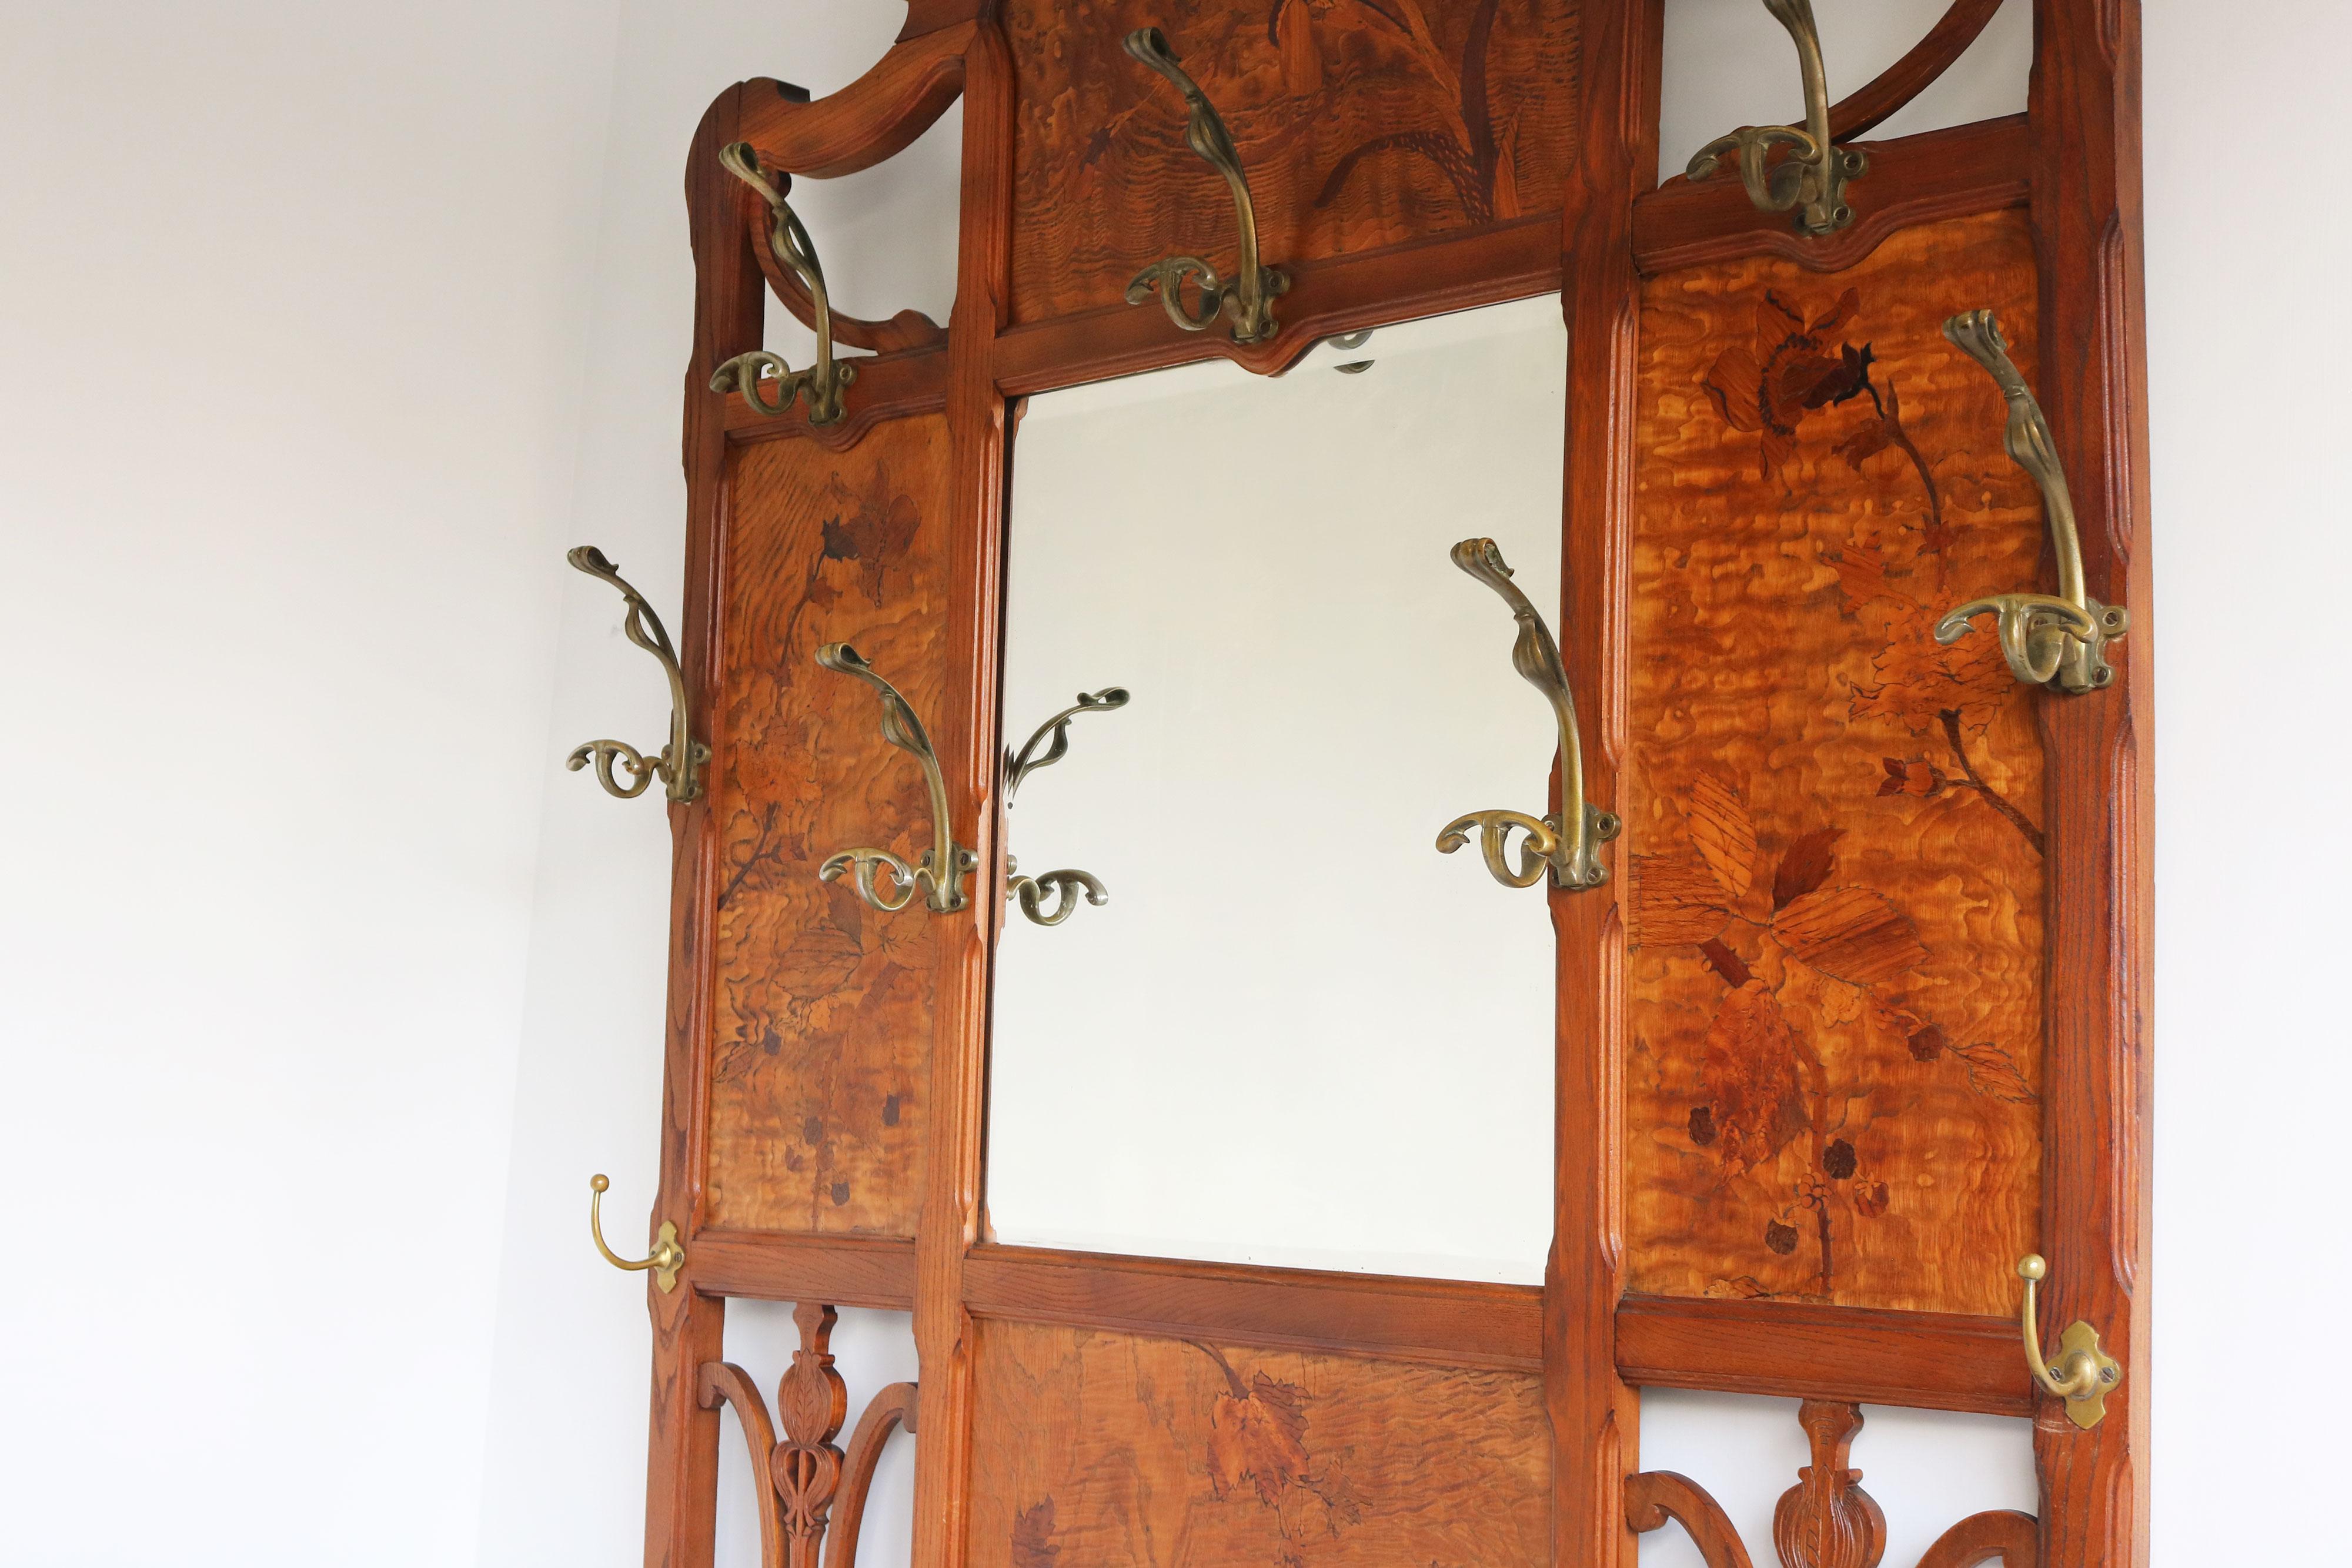 French Art nouveau hall tree / coat rack by Emile galle 1905 marquetry hallway For Sale 4